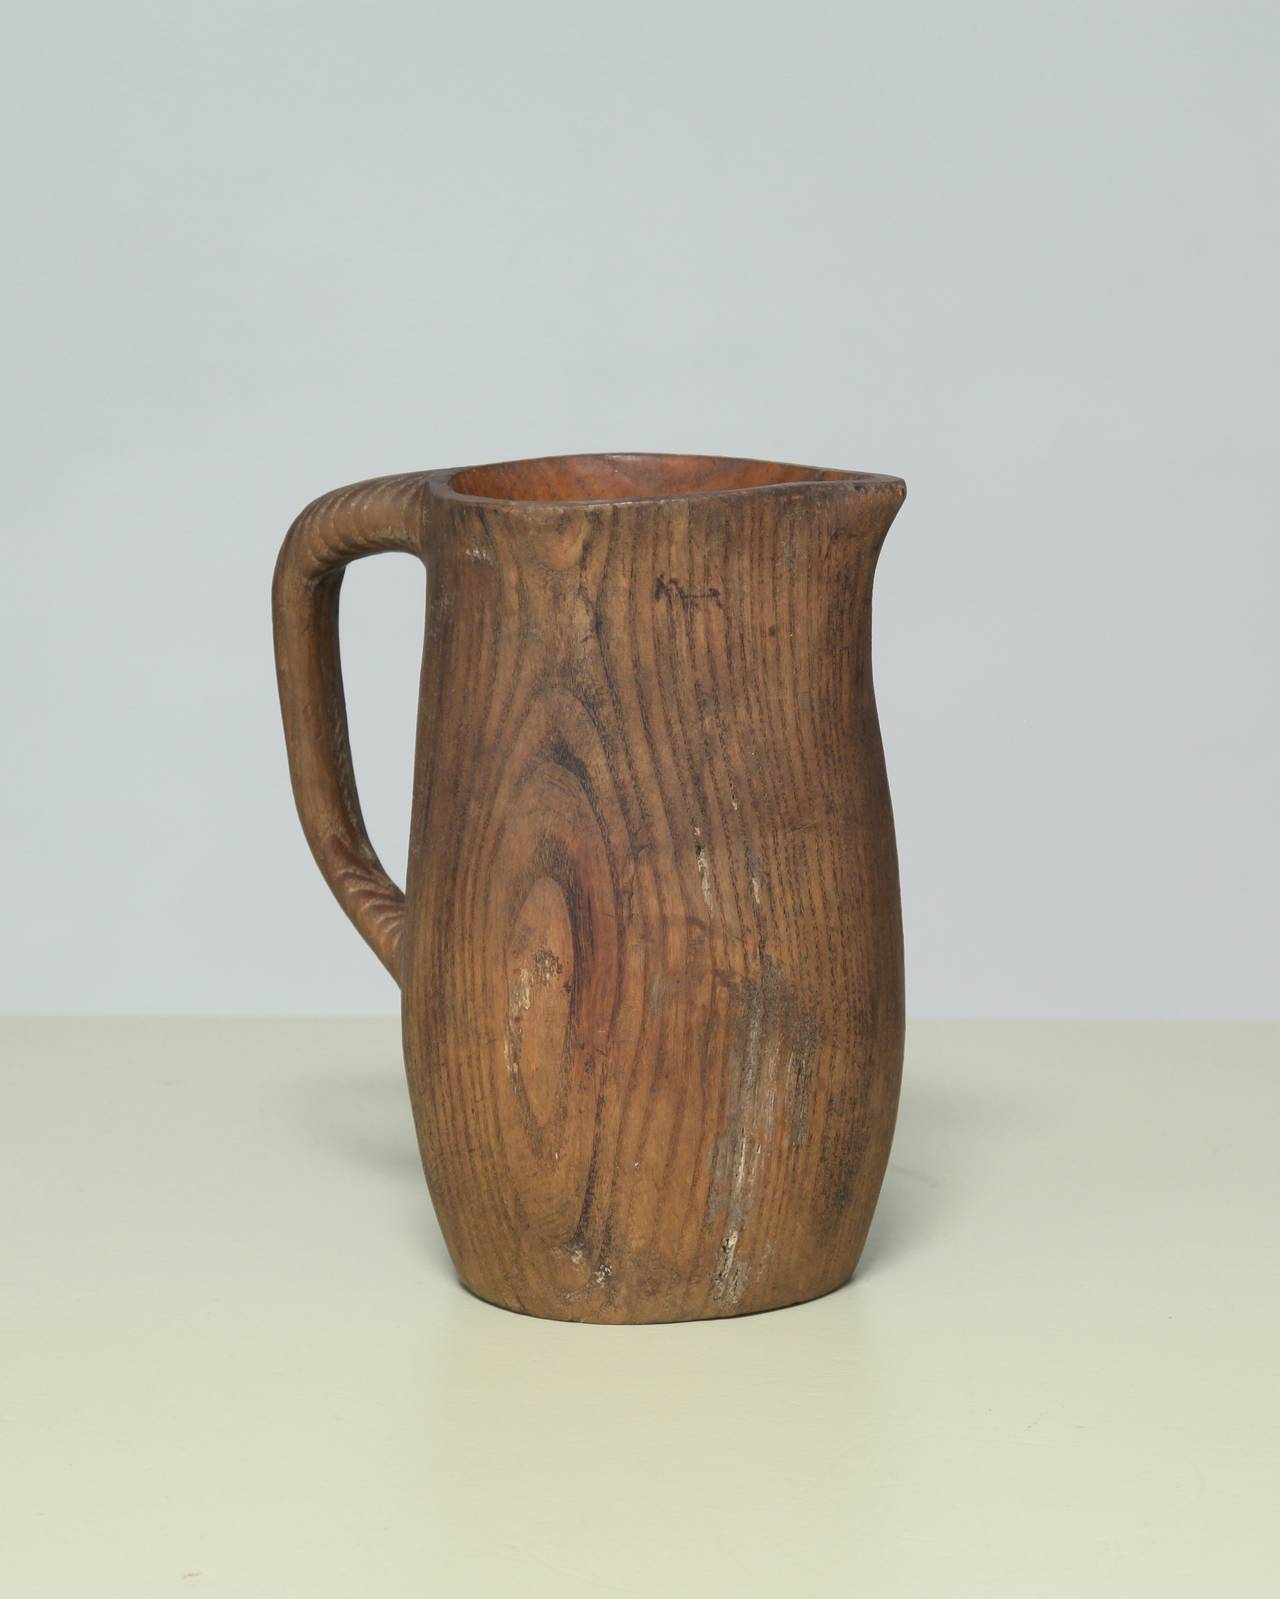 A masterfully crafted pitcher in oak from France, with a beautiful grain in the wood.